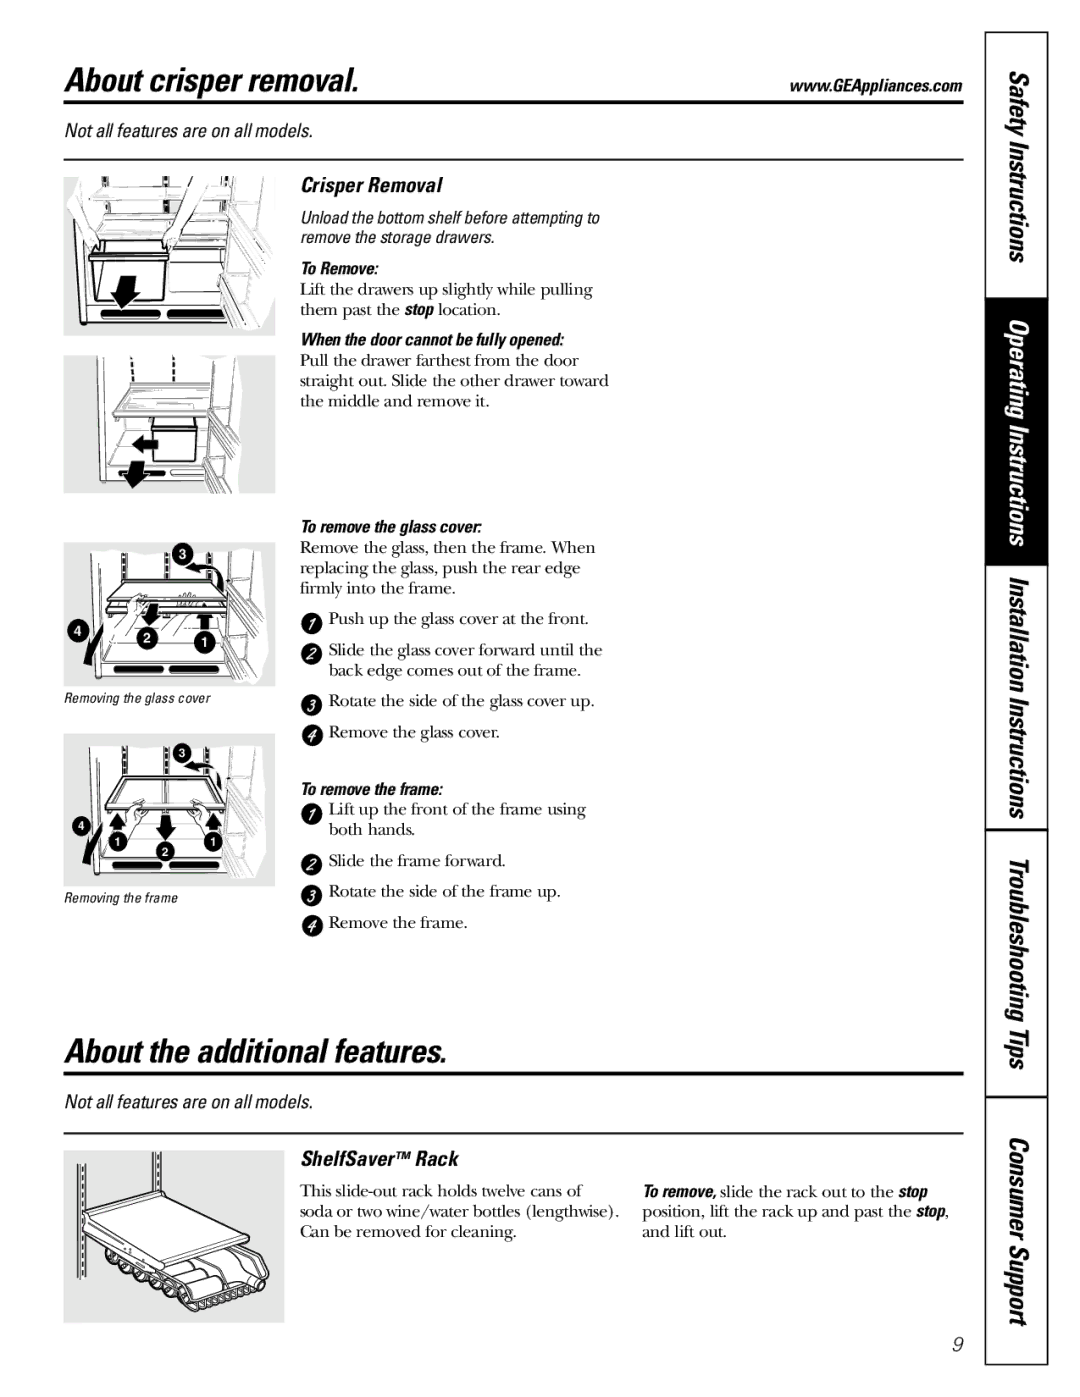 GE MODELS 18 AND 19 installation instructions About crisper removal, About the additional features, Tips Consumer Support 